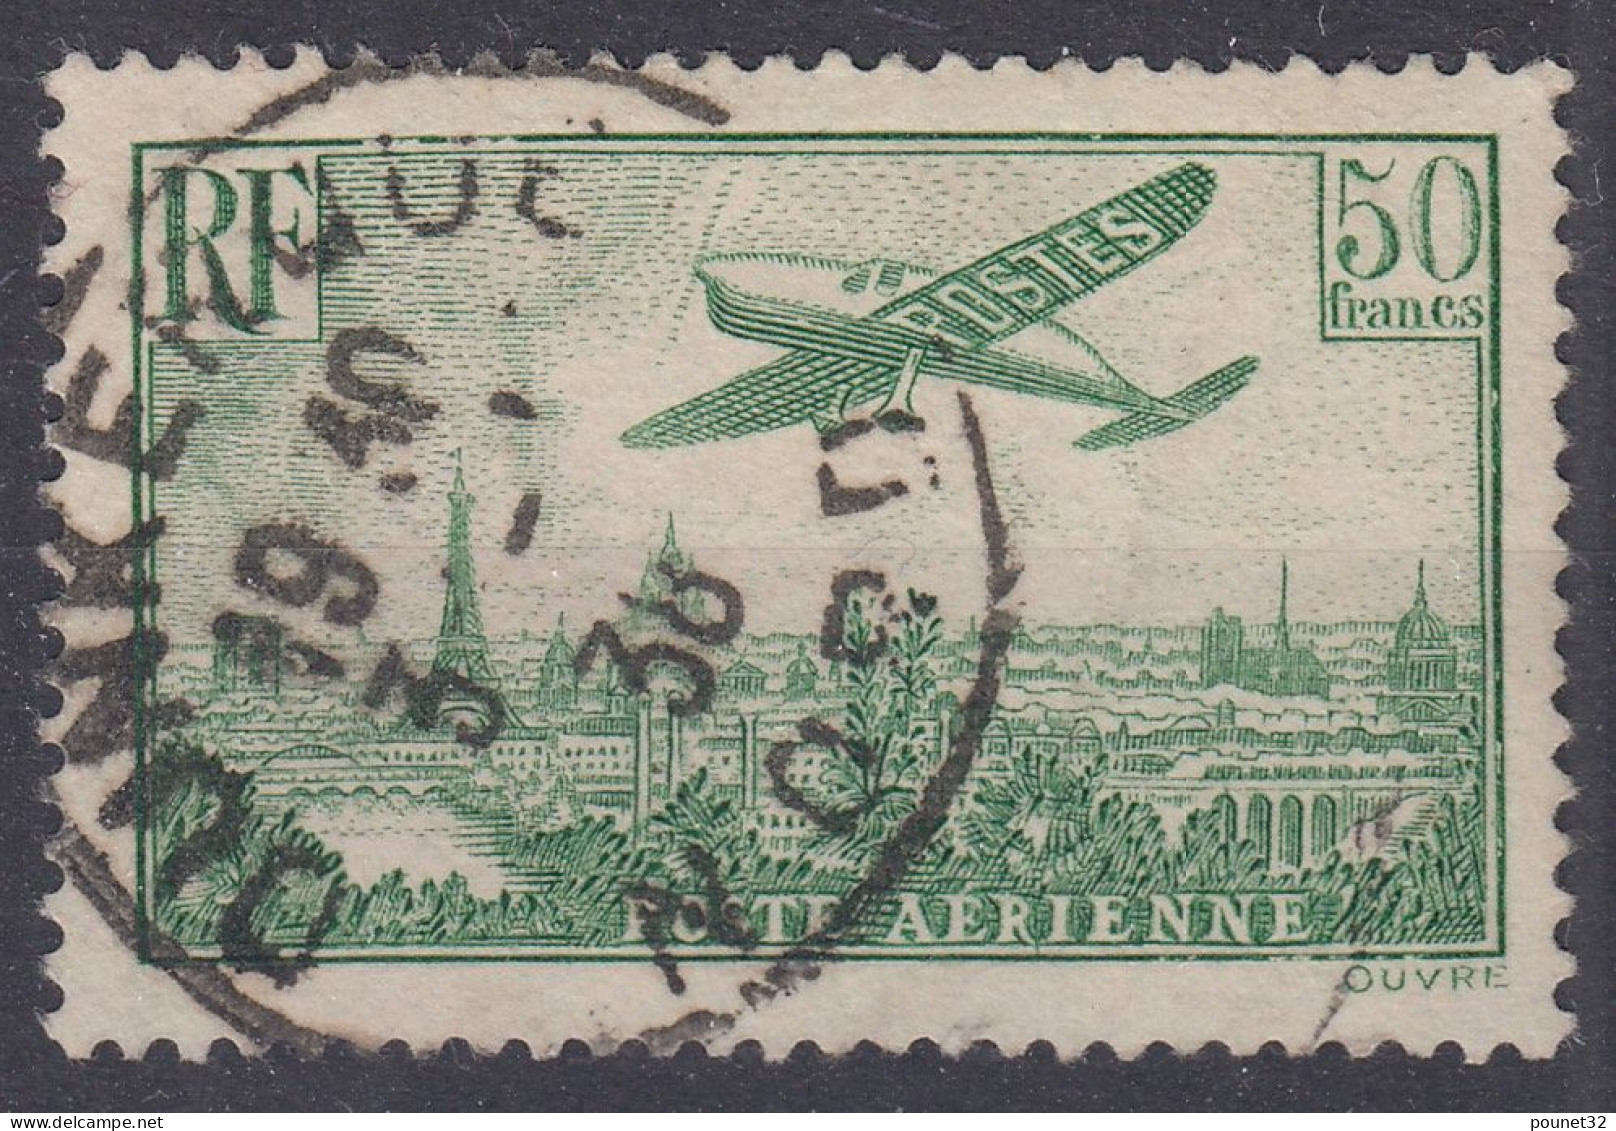 TIMBRE FRANCE POSTE AERIENNE 50F N° 14 OBLITERATION DE DUNKERQUE - COTE 420 € - 1927-1959 Used